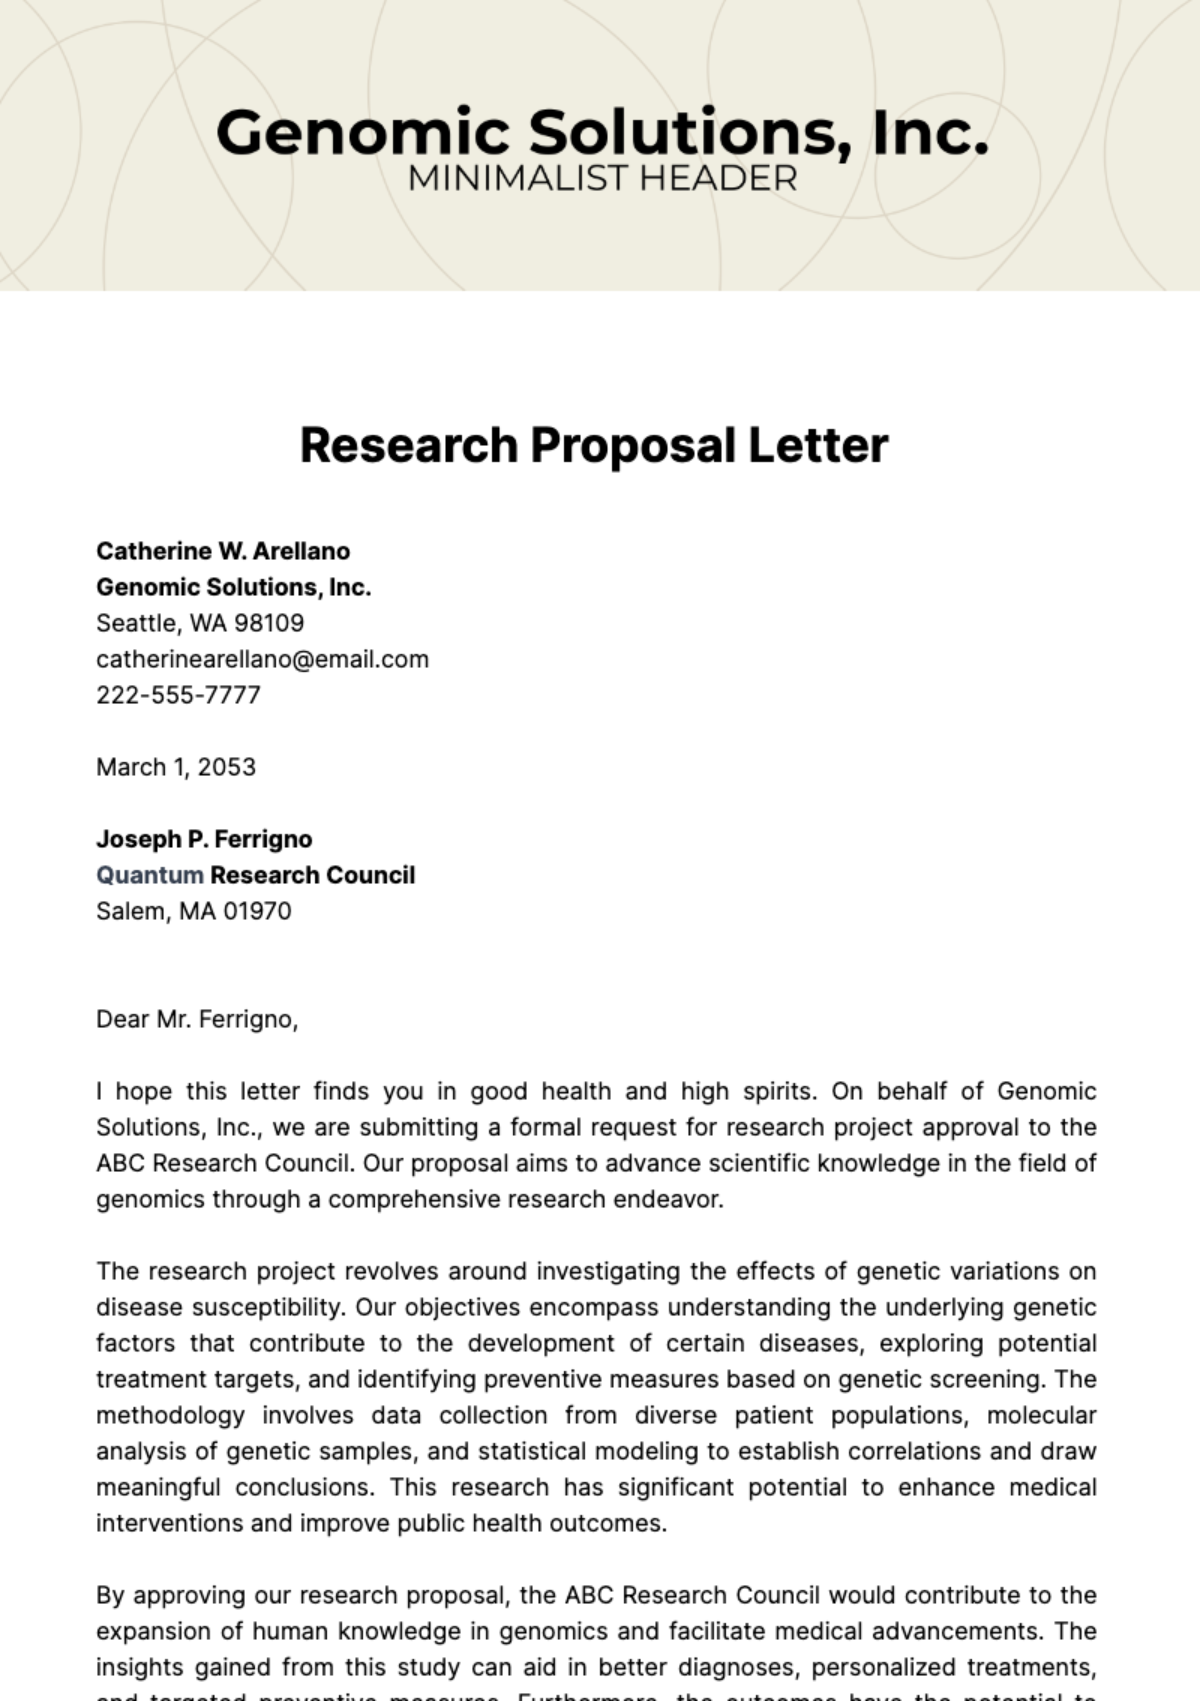 Research Proposal Letter Template